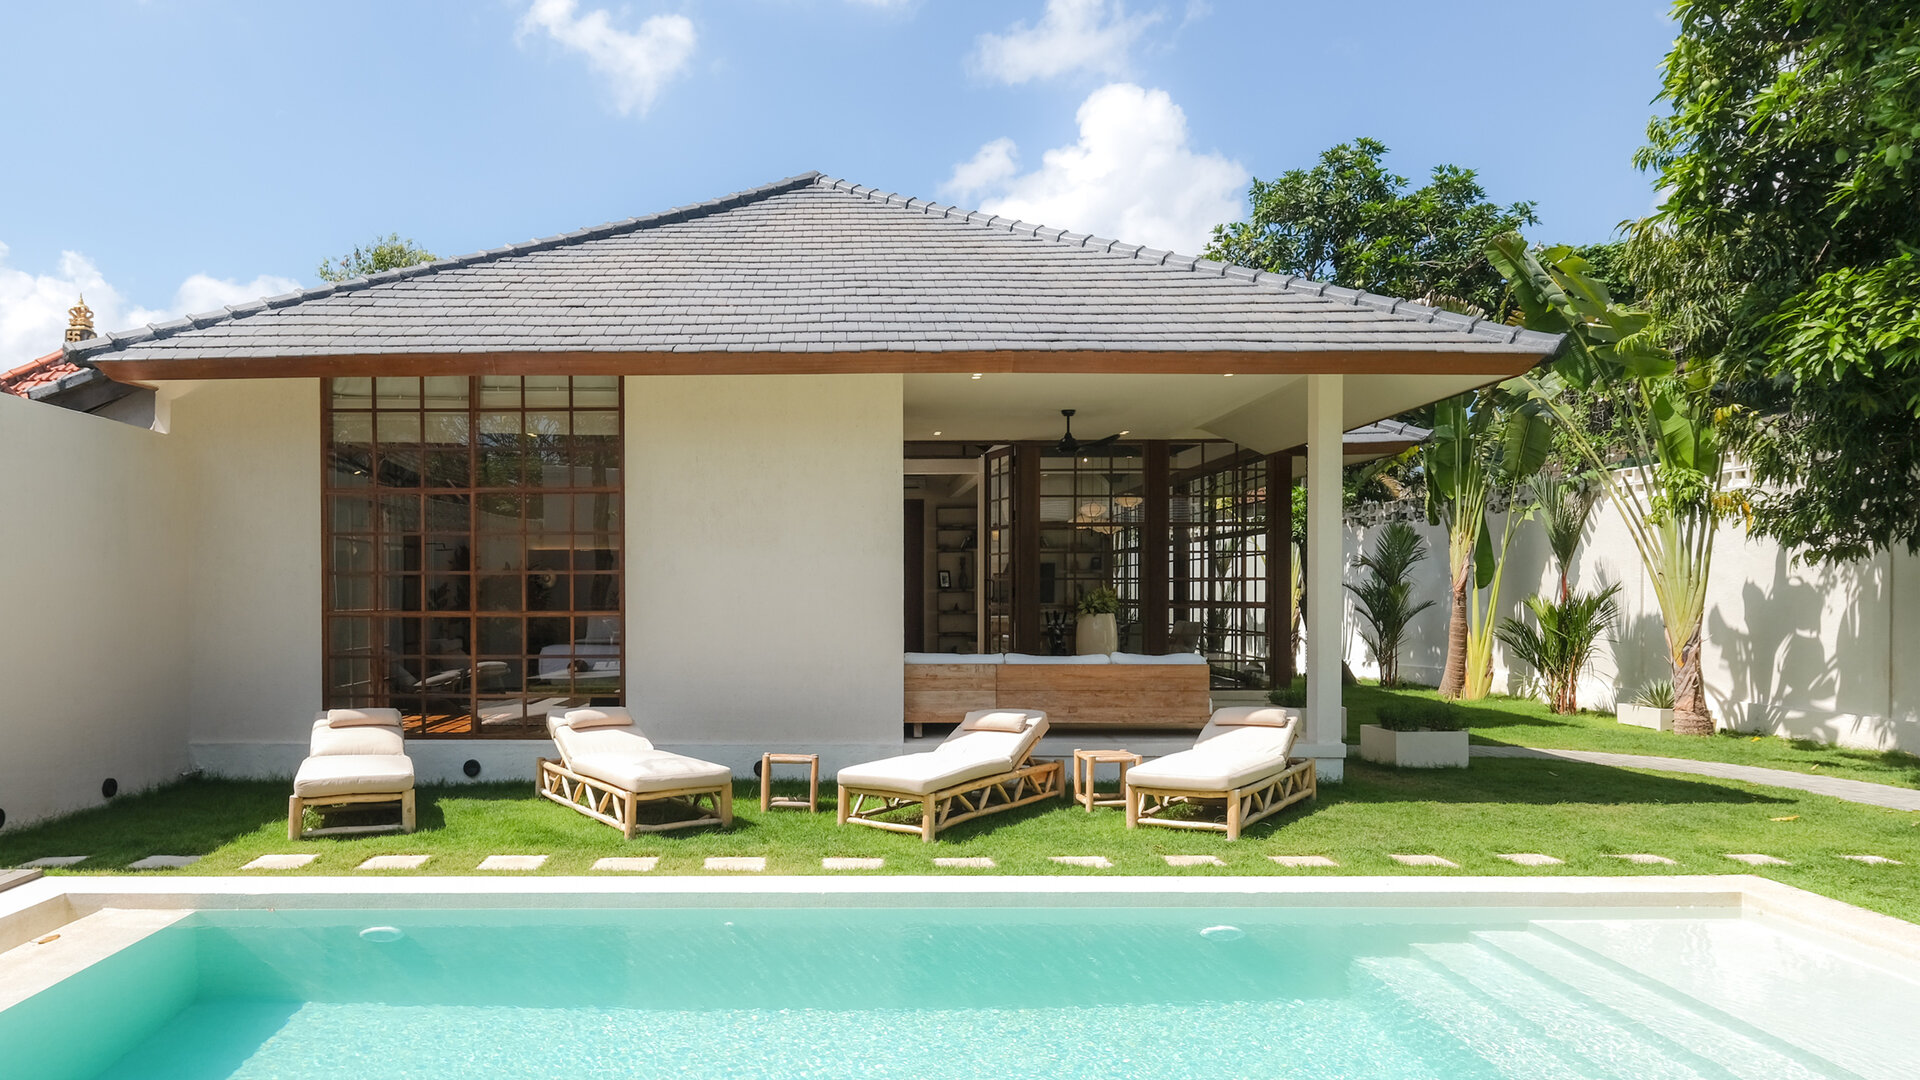 A home away from home in Bali